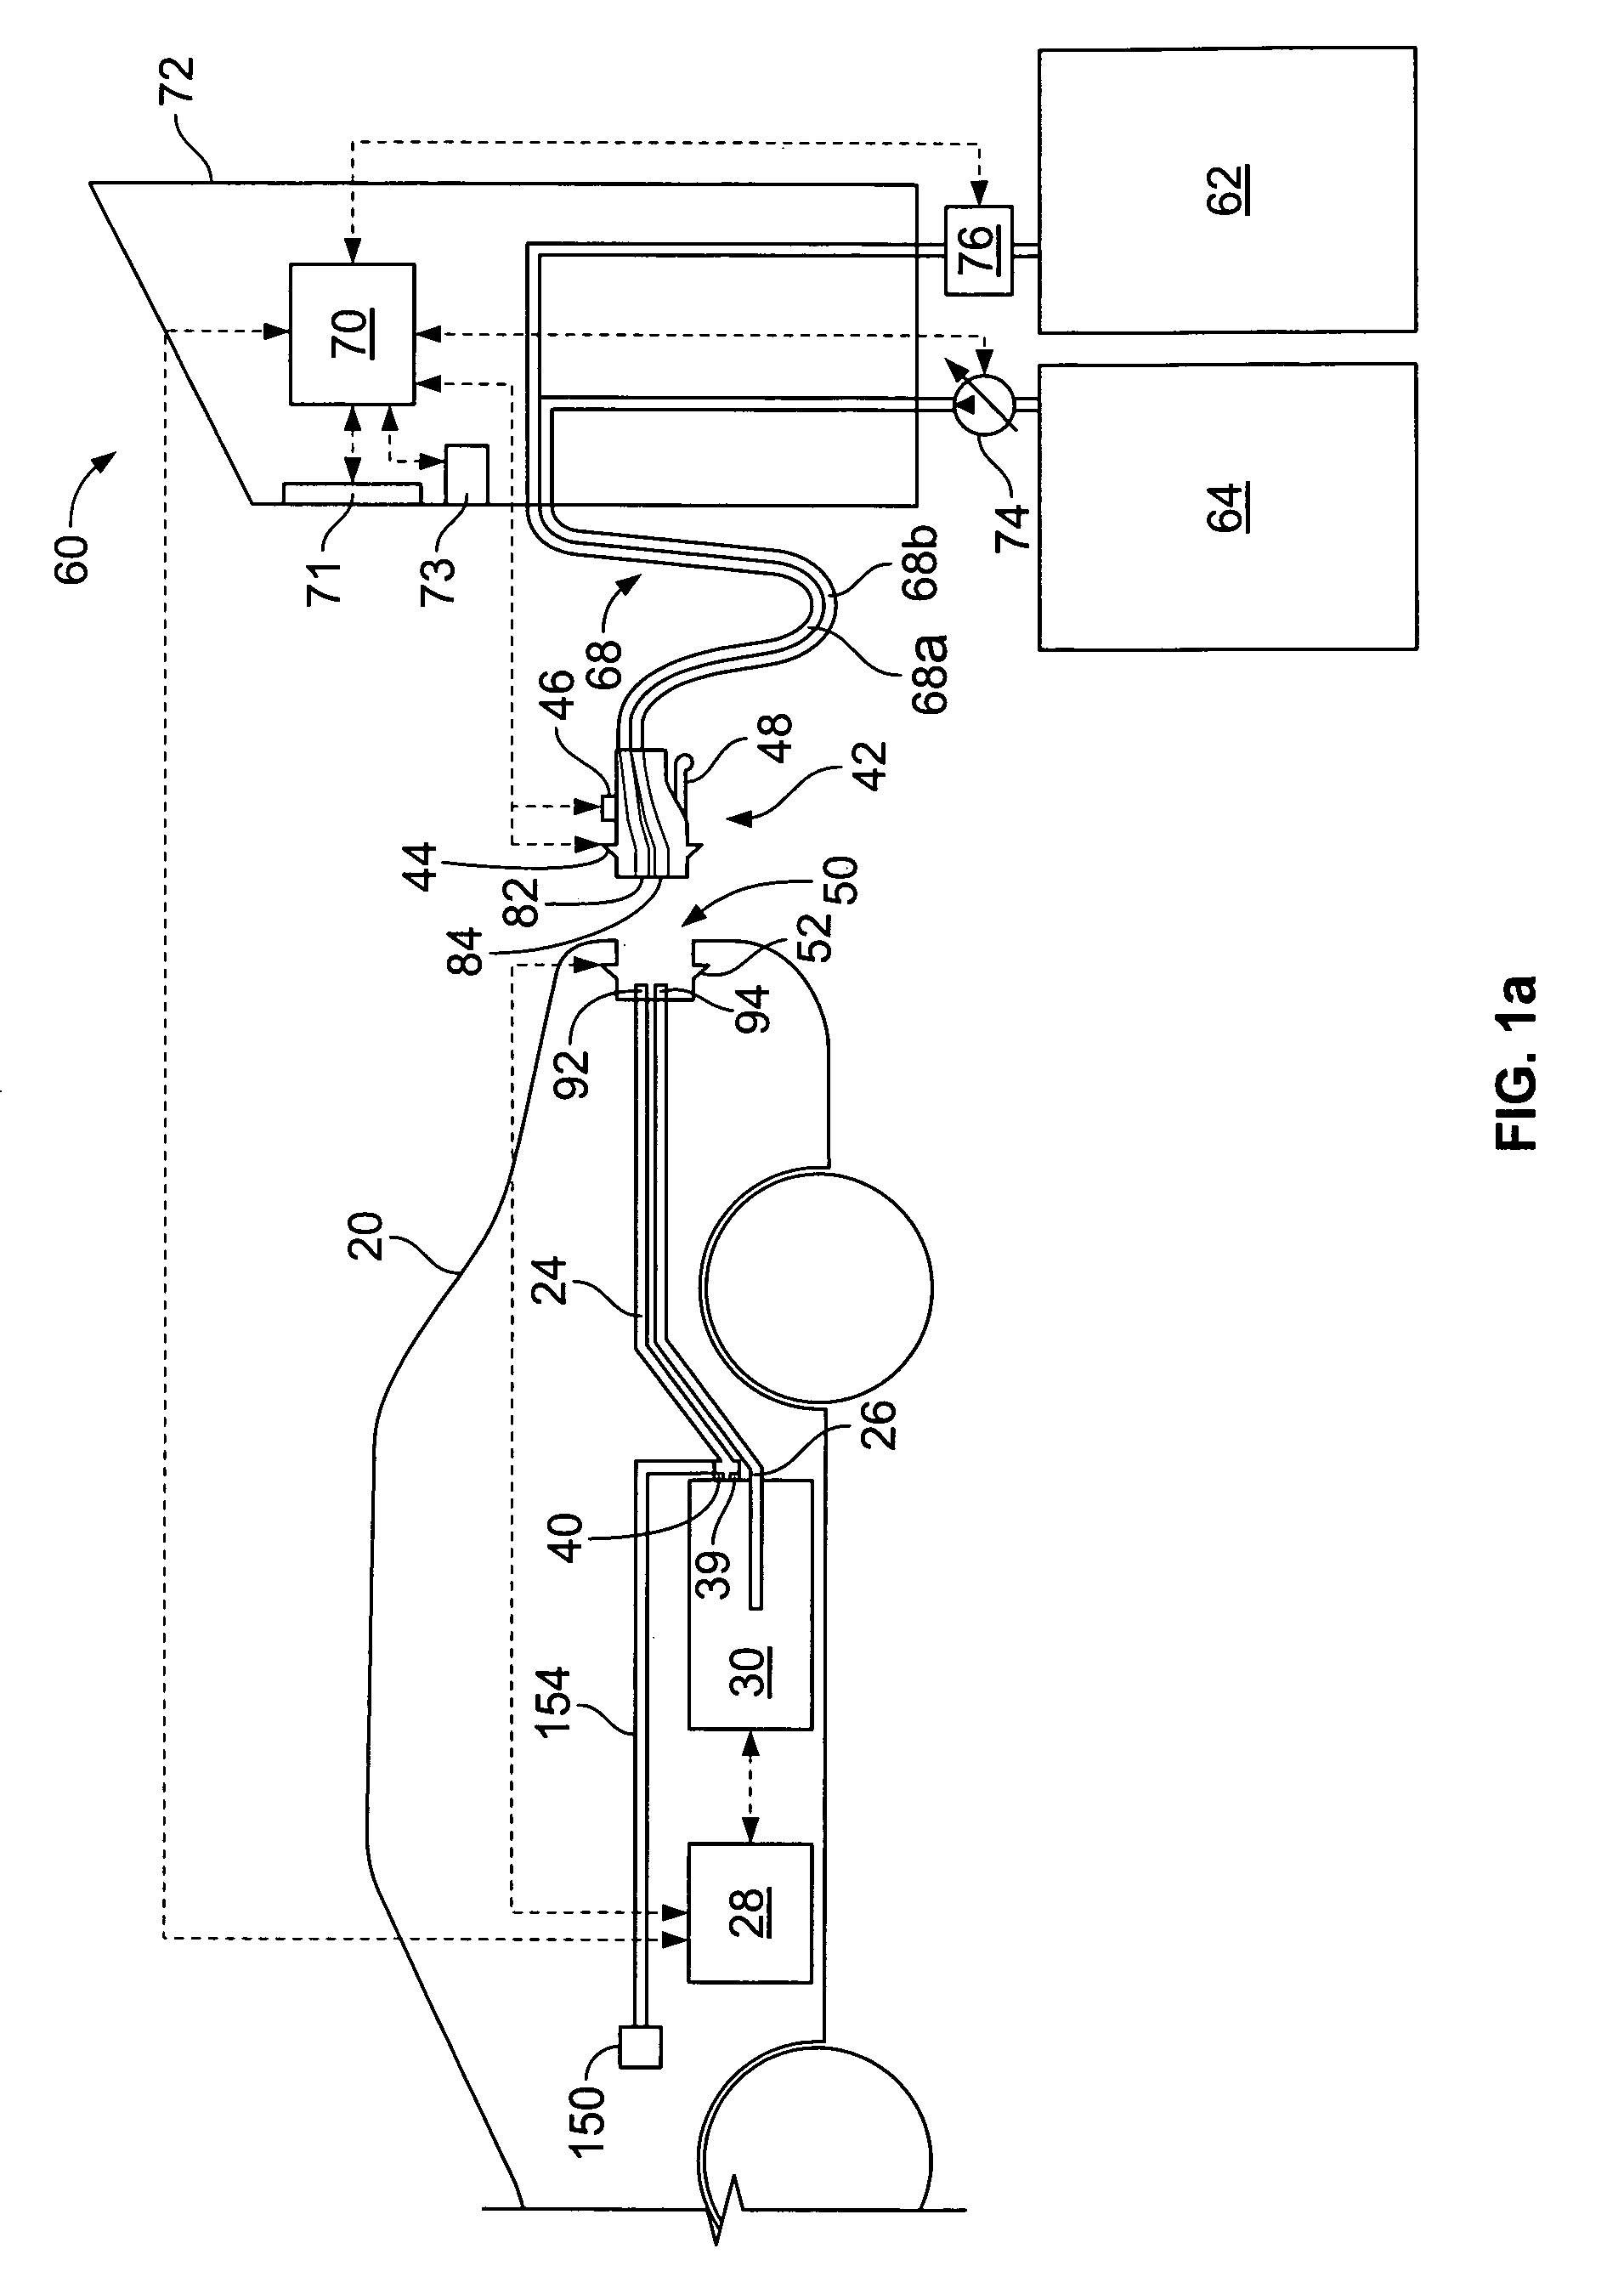 Station for rapidly charging an electric vehicle battery